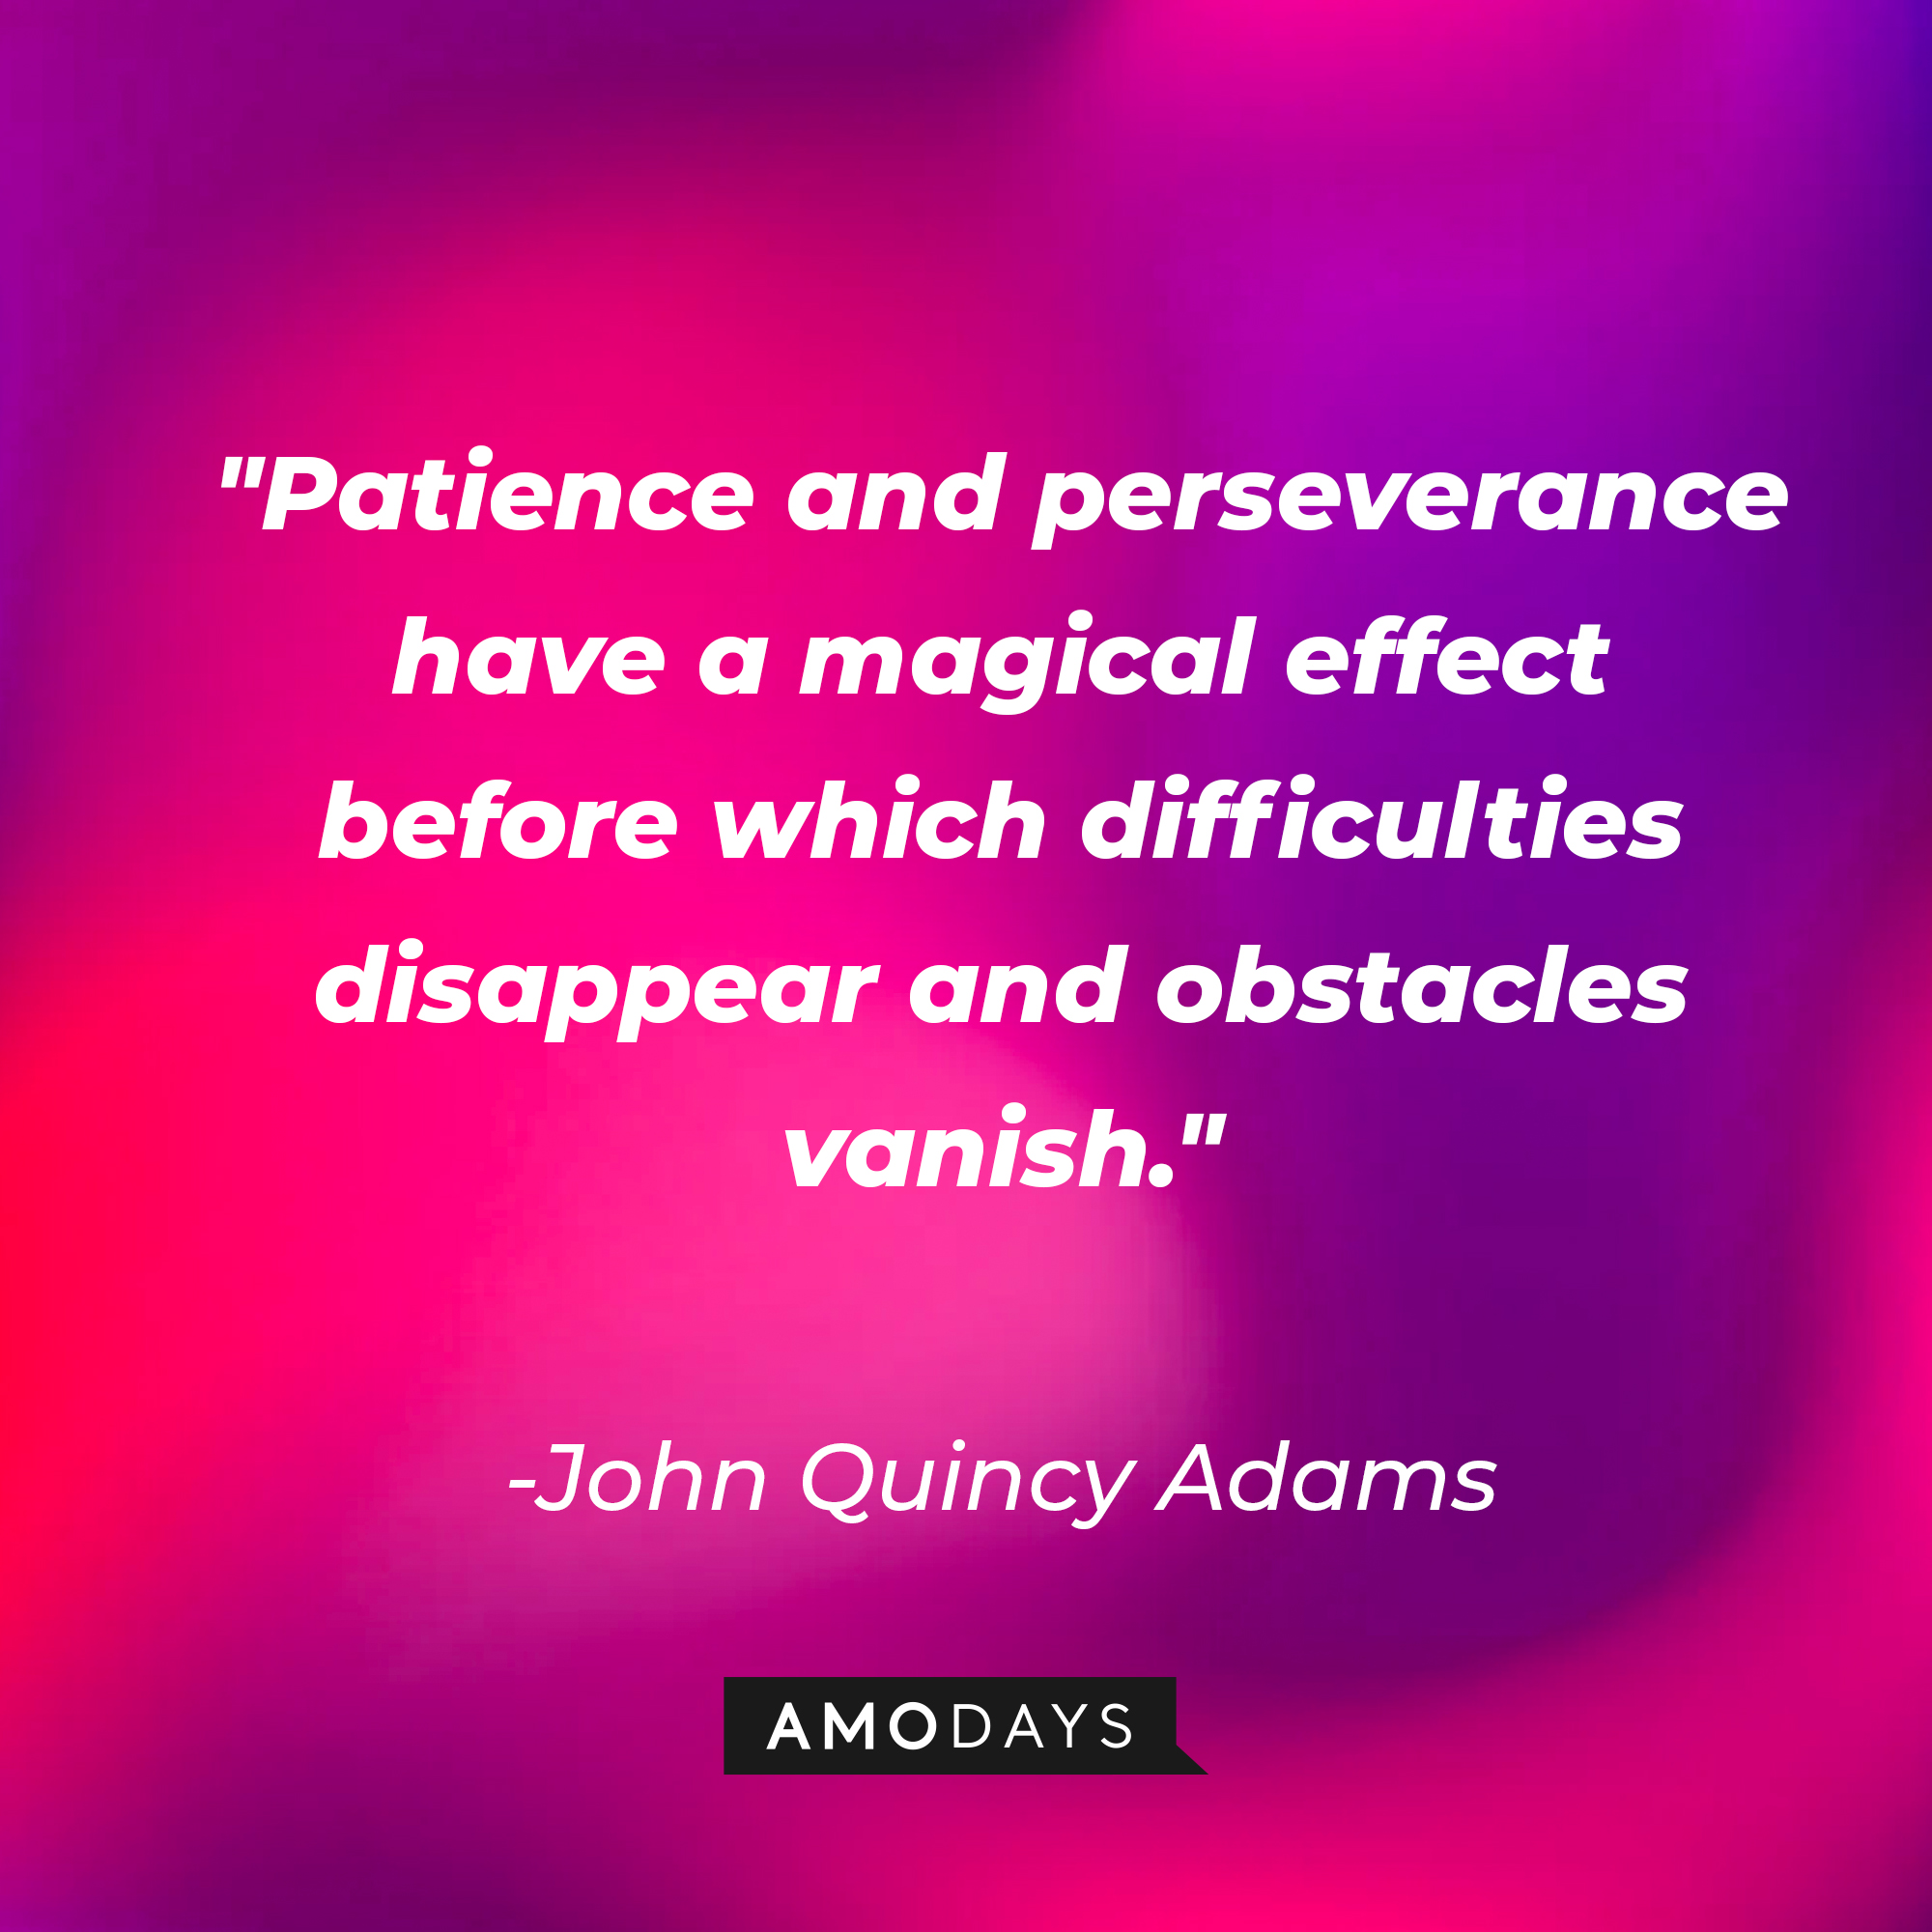 John Quincy Adams' quote: "Patience and perseverance have a magical effect before which difficulties disappear and obstacles vanish." | Image: AmoDays